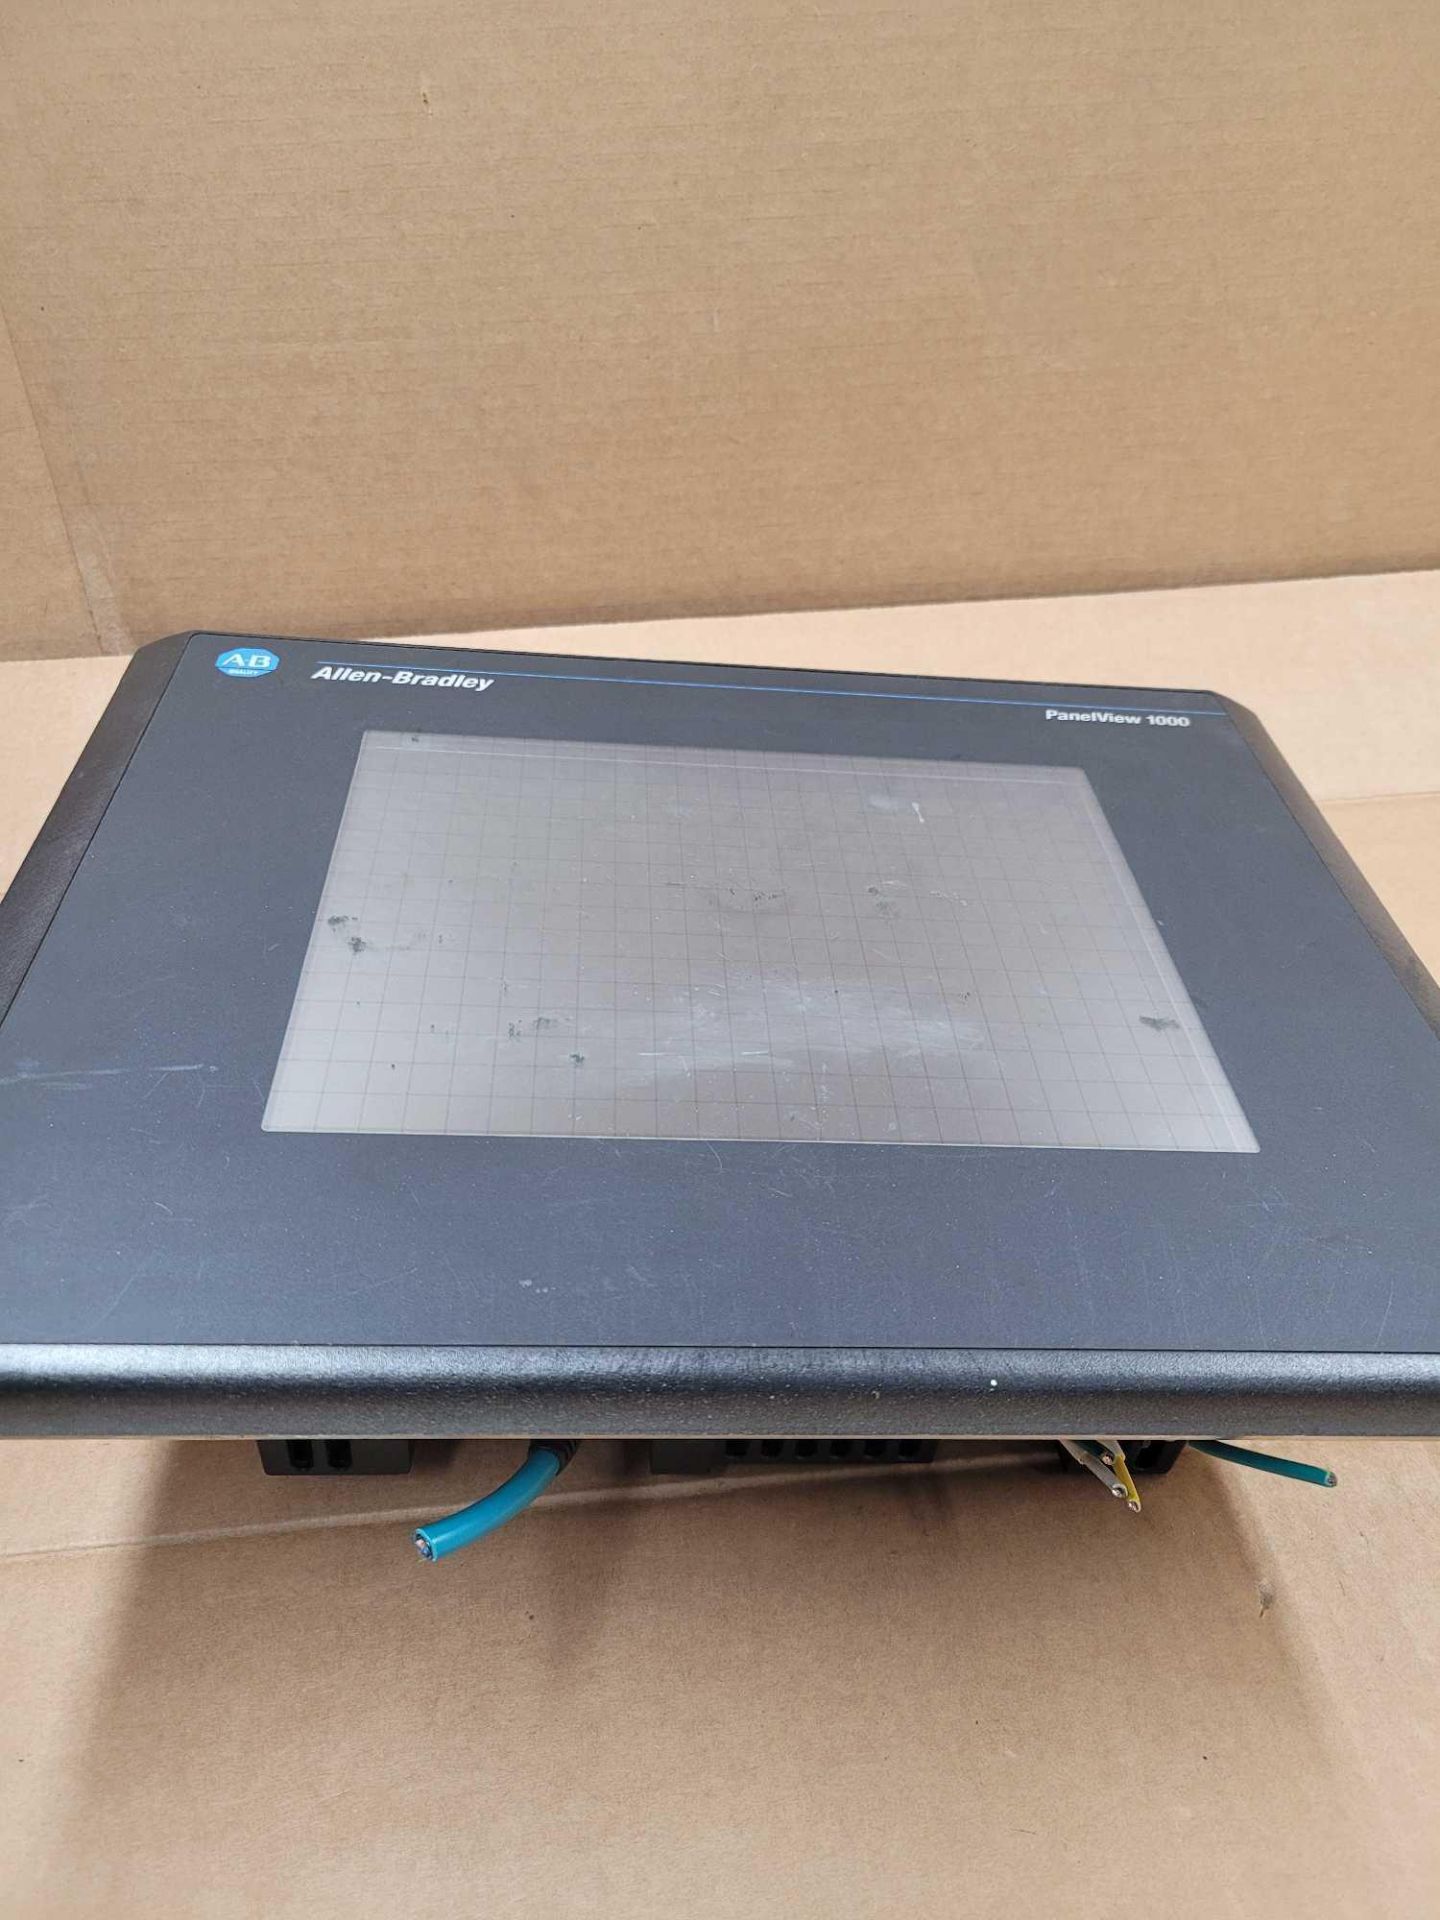 ALLEN BRADLEY 2711-T10C20 / PanelView 1000 Touch Screen Operator Interface  /  Lot Weight: 6.6 lbs - Image 6 of 6